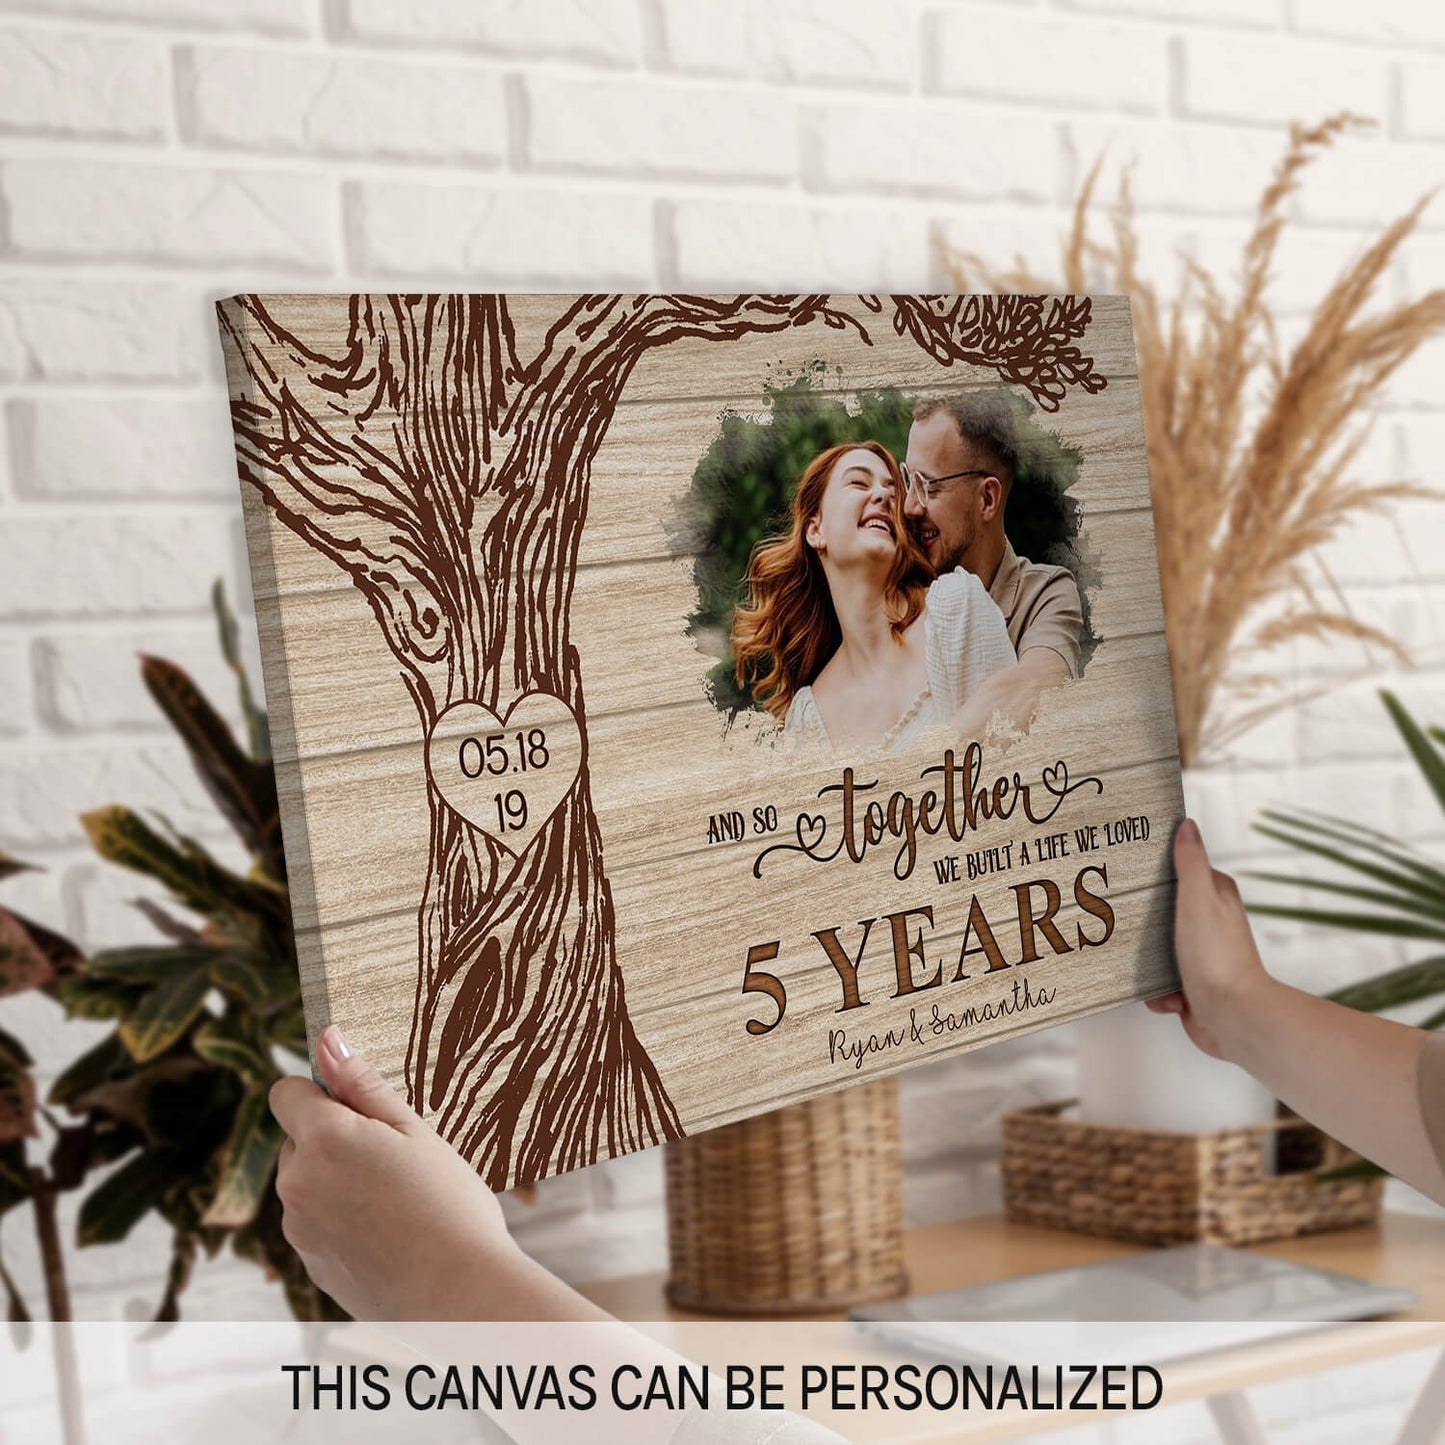 5 Years - Personalized 5 Year Anniversary gift For Husband or Wife - Custom Canvas Print - MyMindfulGifts